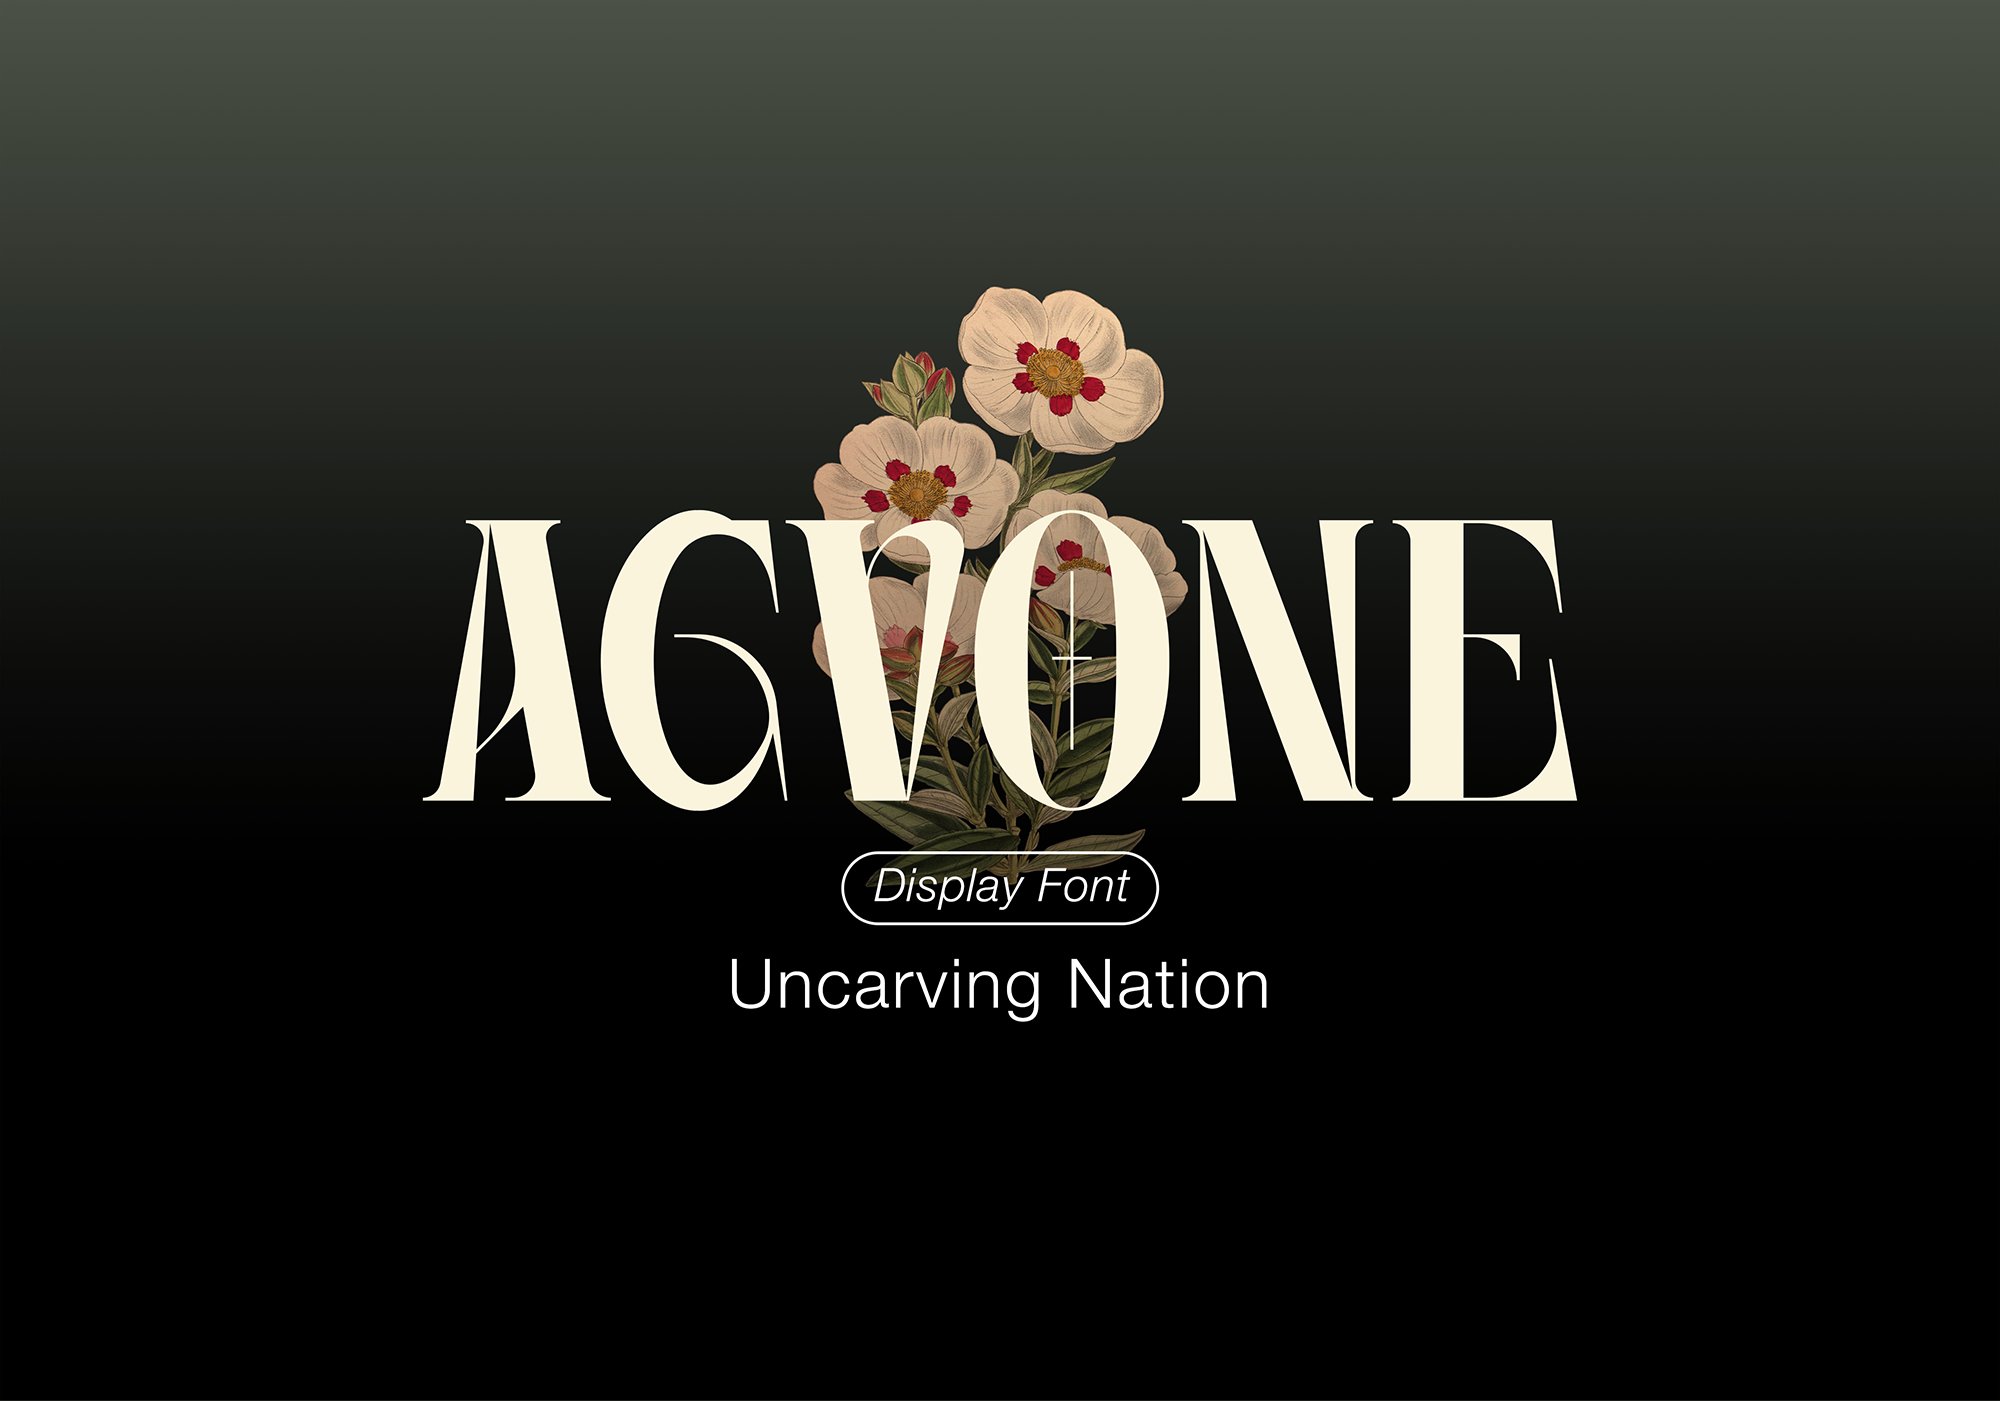 Agvone - Display Font cover image.